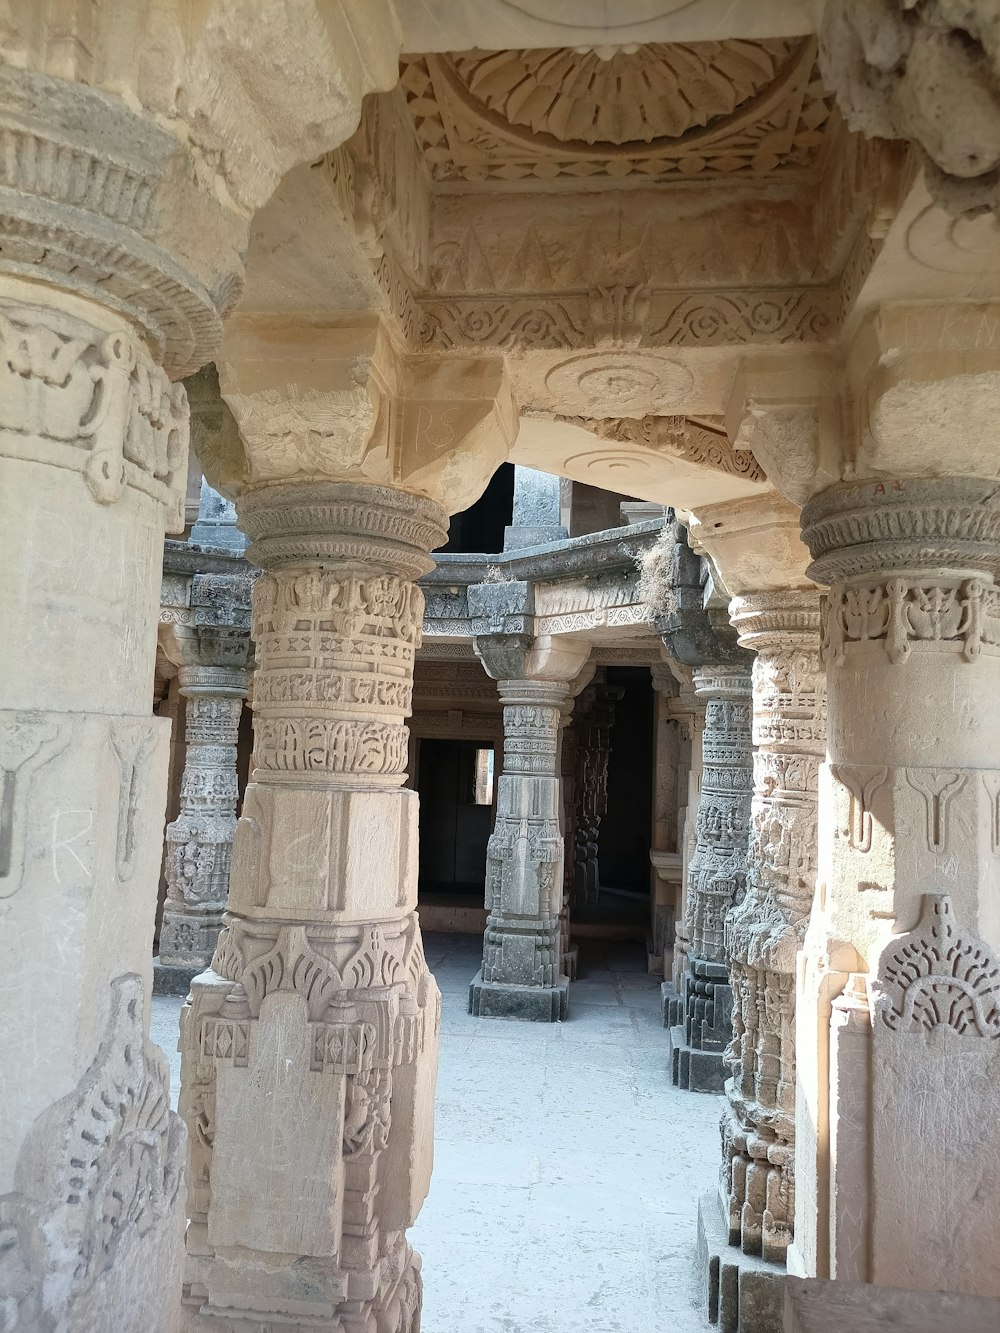 a group of stone pillars with carvings on them